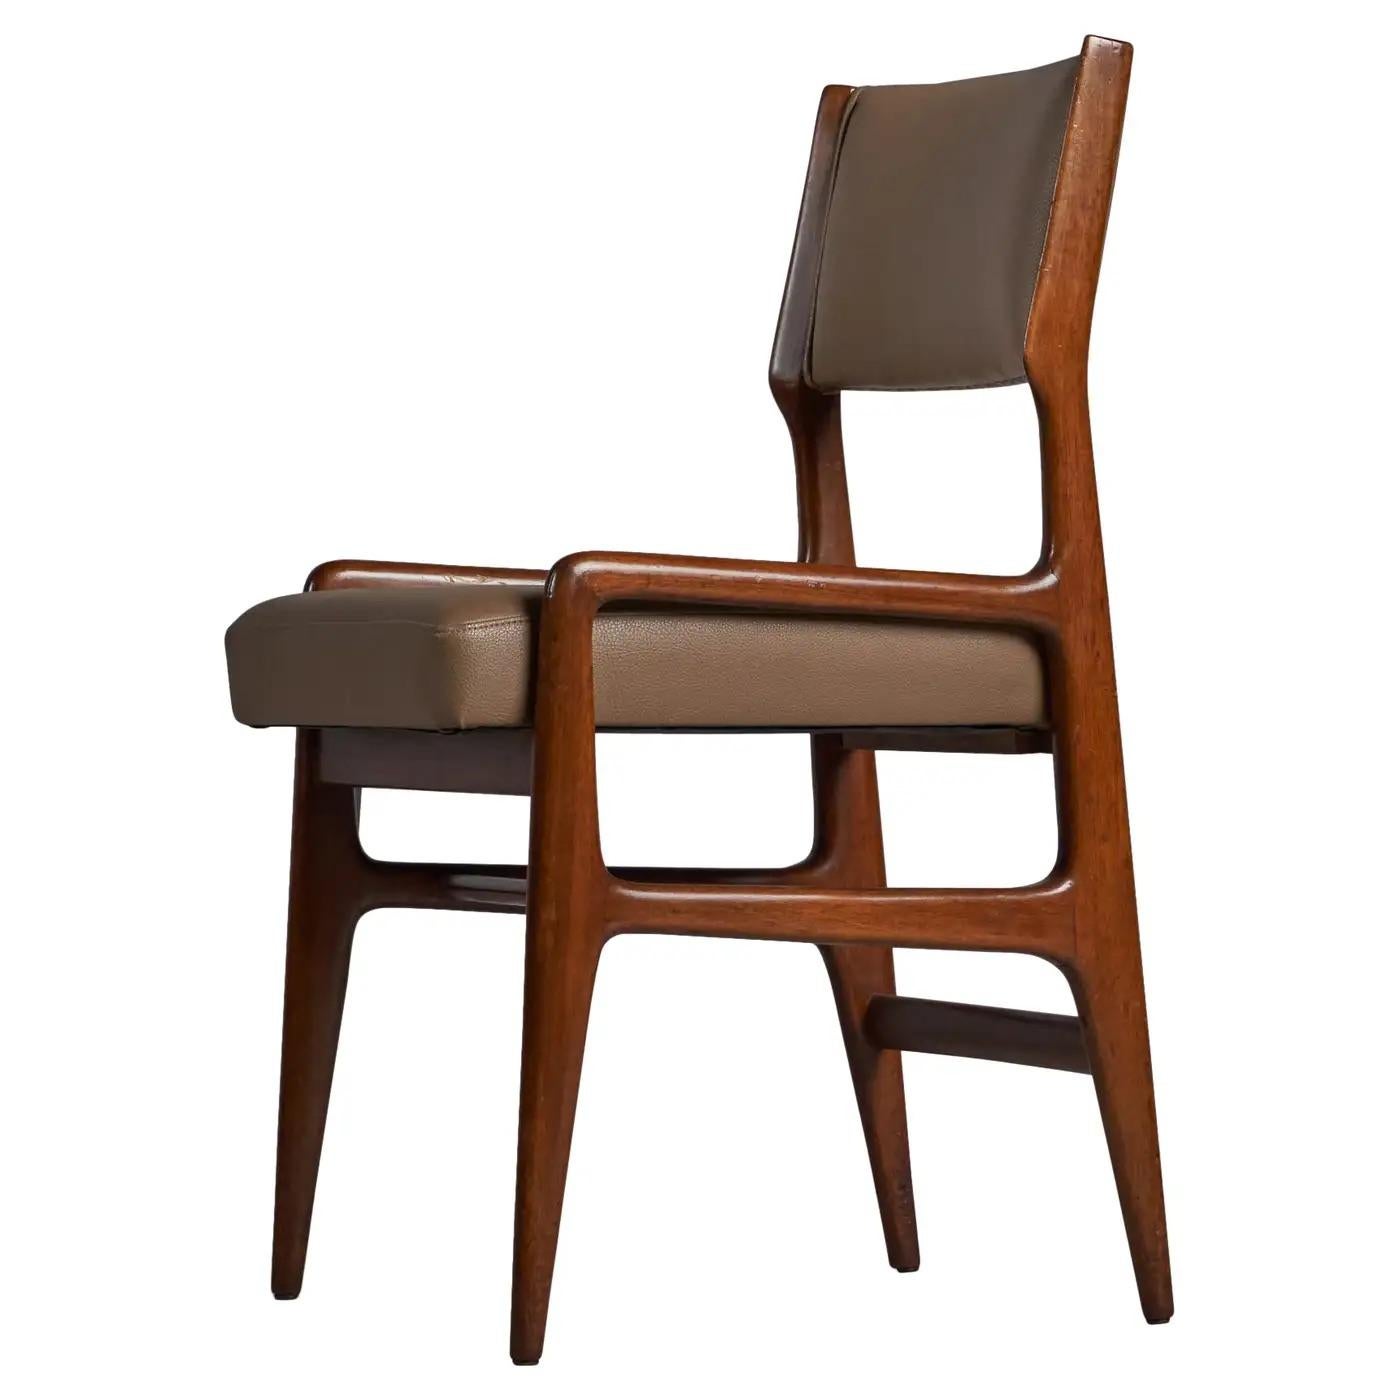 A walnut and brown leather dining chair, designed by Gio Ponti and produced by Figli di Amedeo Cassina, Italy 1960s.

19.25” seat height